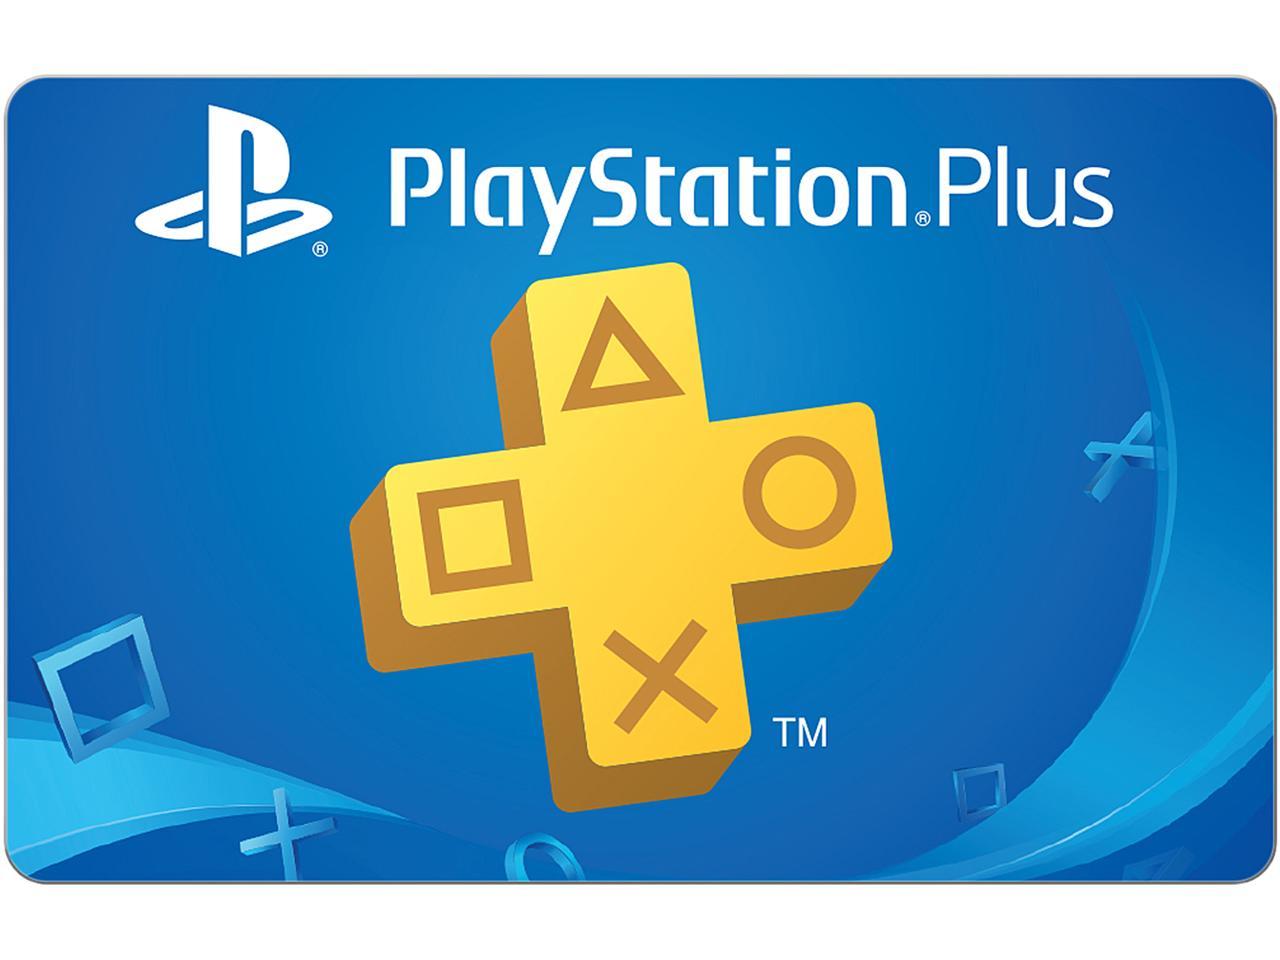 playstation plus cost 3 month